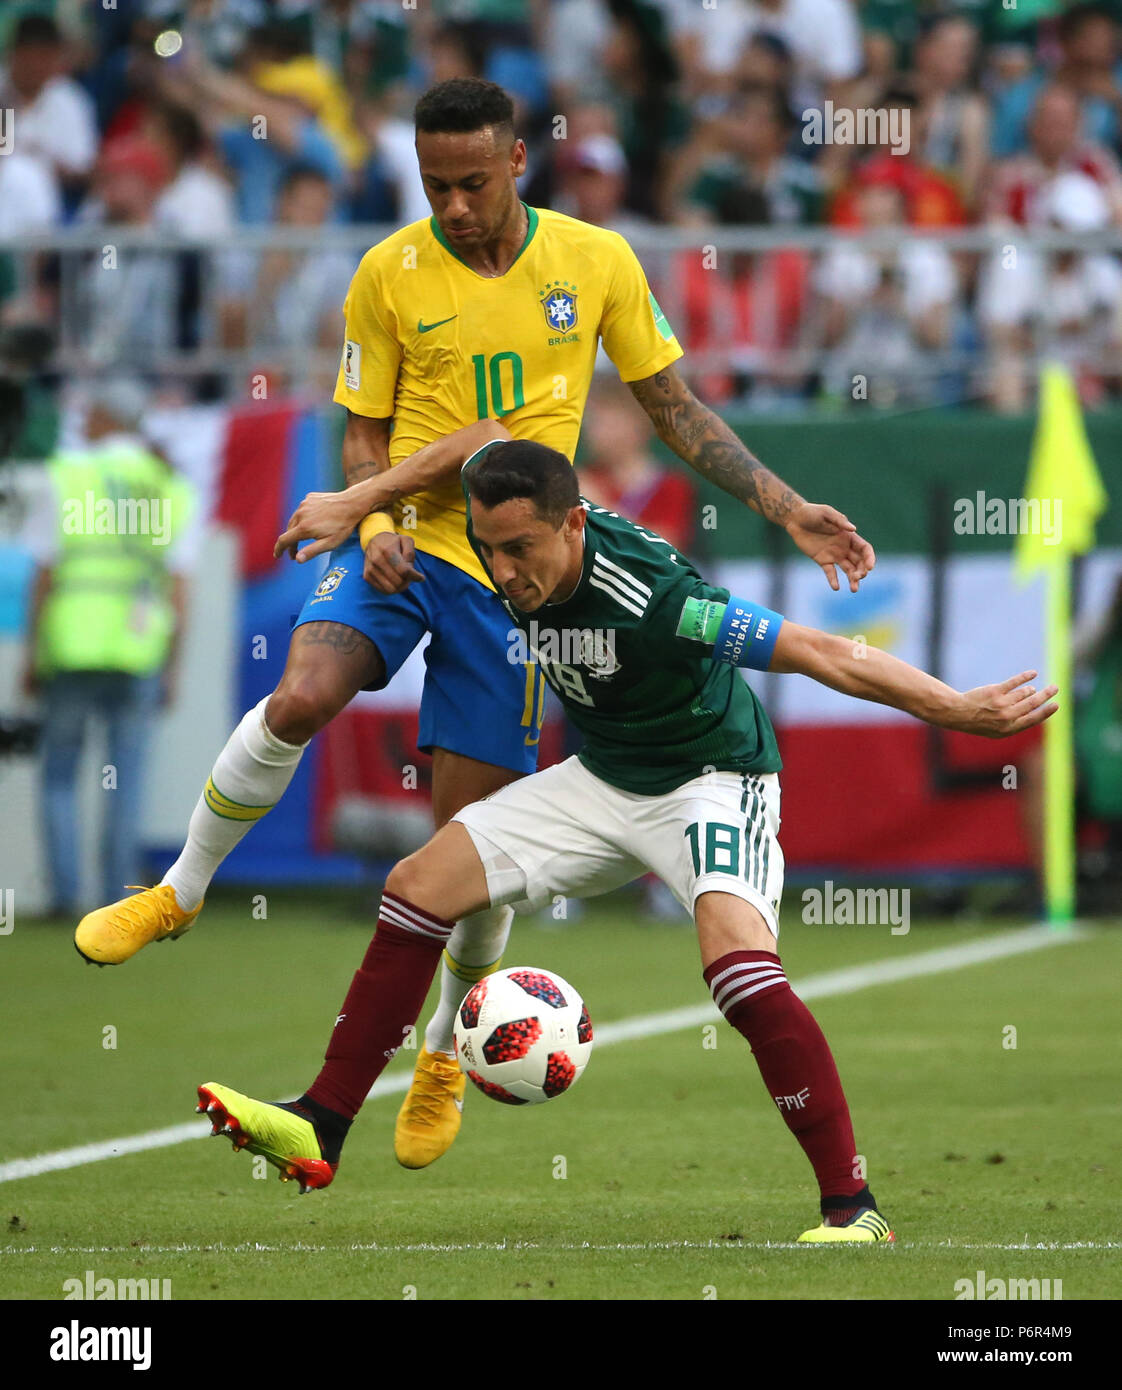 Samara, Russia. 2nd July, 2018. Neymar (top) of Brazil vies with Andres Guardado of Mexico during the 2018 FIFA World Cup round of 16 match between Brazil and Mexico in Samara, Russia, July 2, 2018. Brazil won 2-0 and advanced to the quarter-final. Credit: Li Ming/Xinhua/Alamy Live News Stock Photo